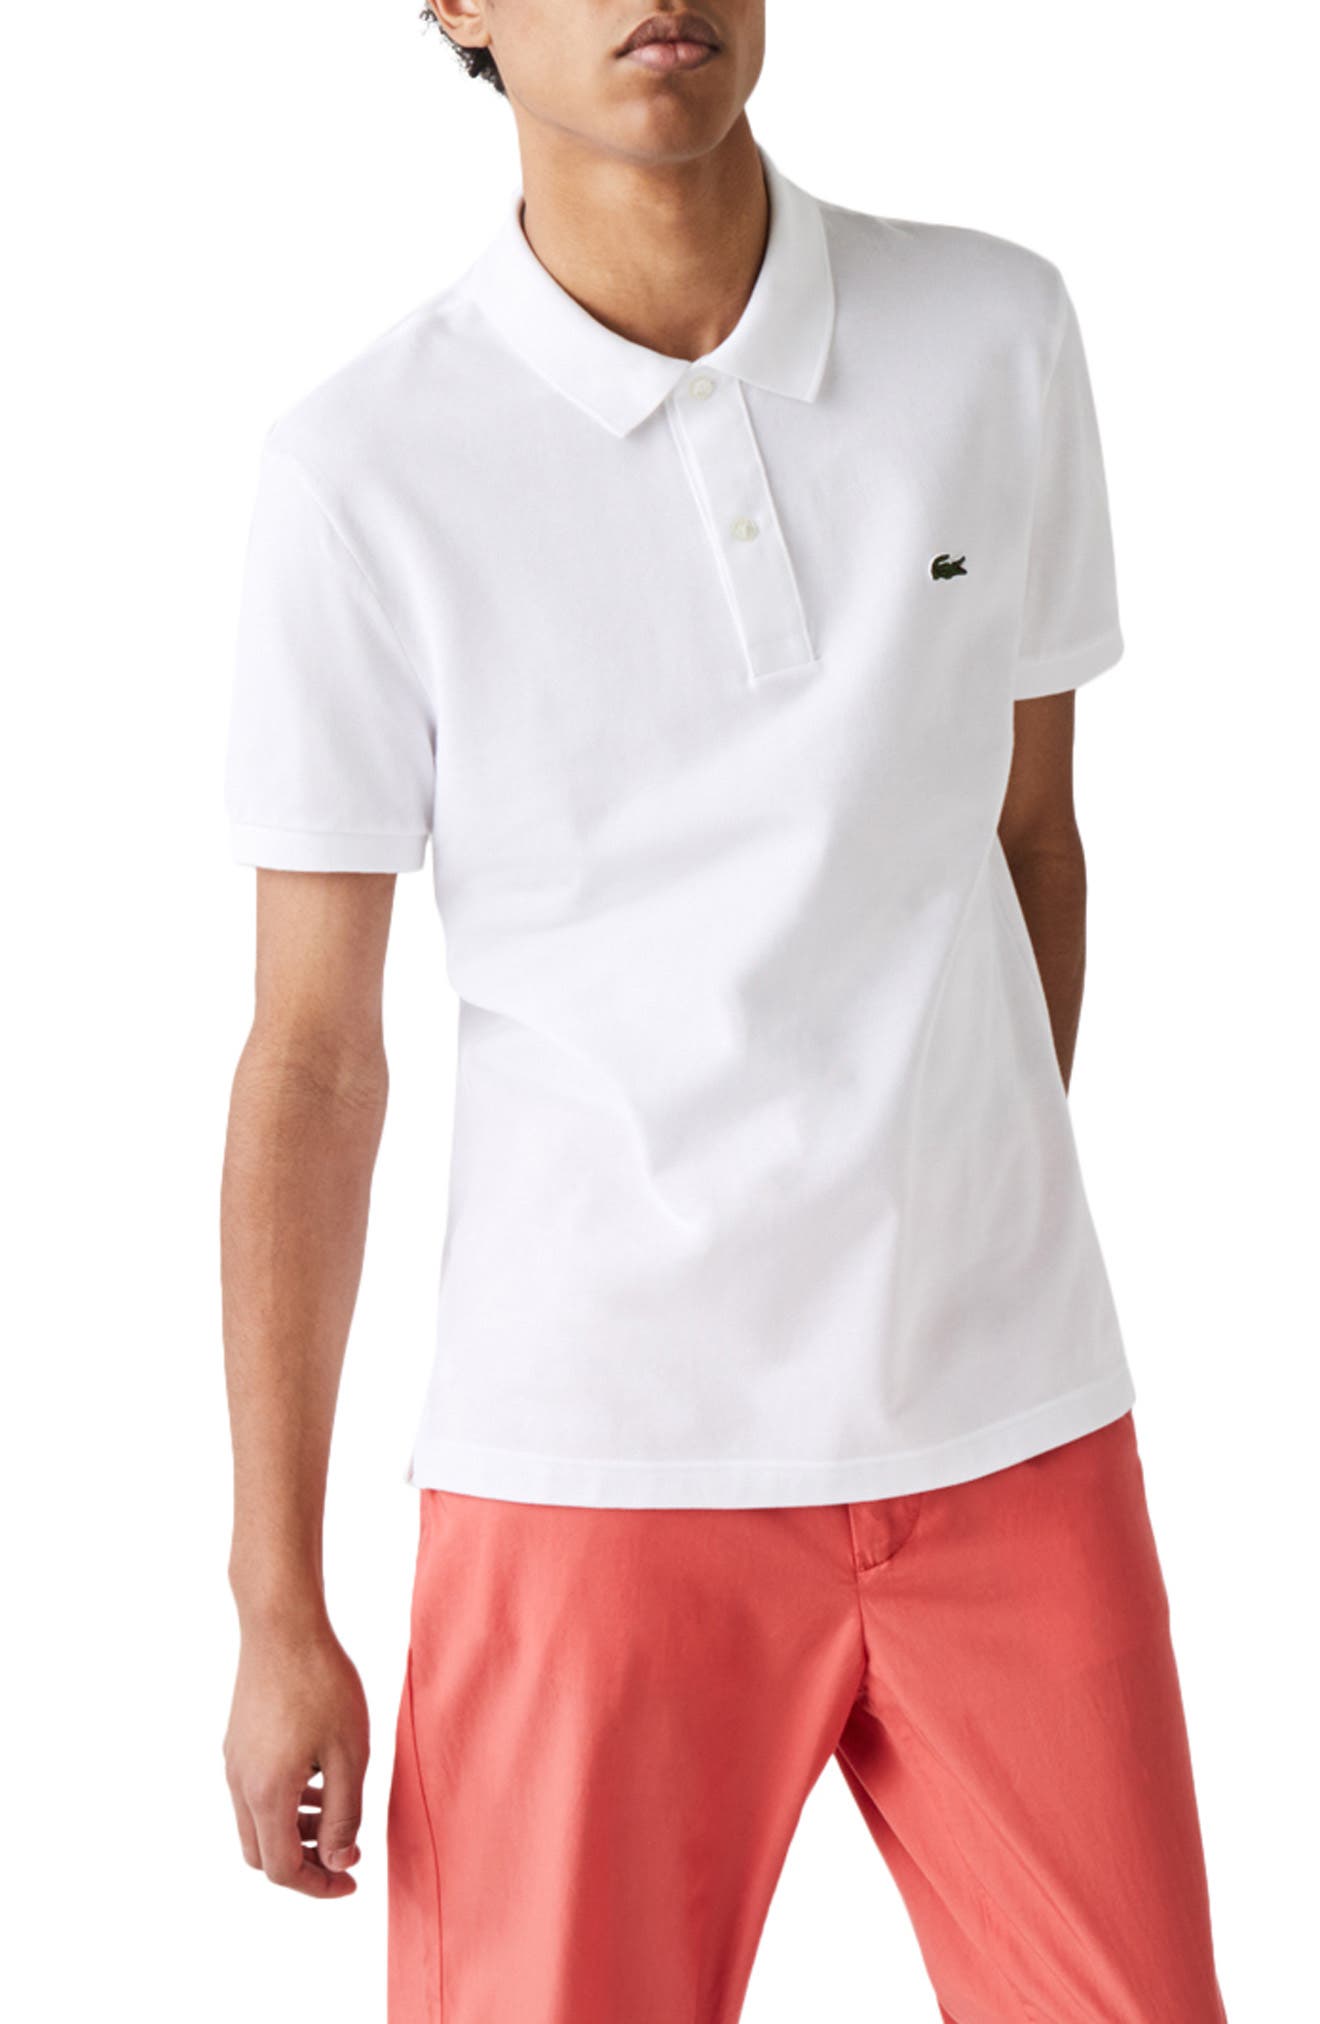 Buy > mens shirts lacoste > in stock